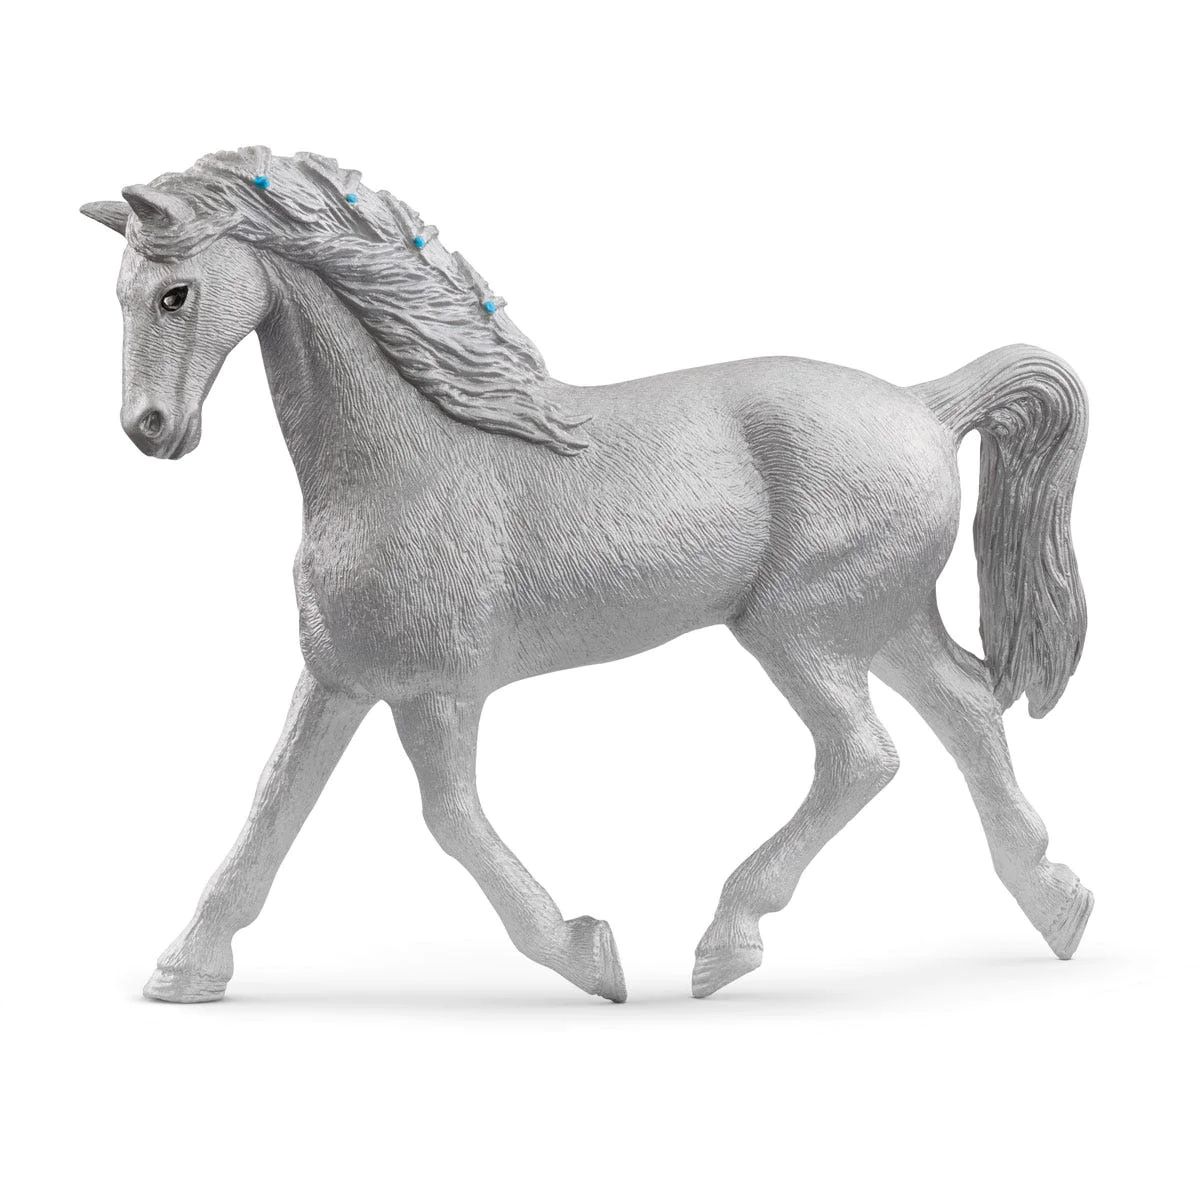 Limited-Edition Silver Horse | Schleich USA Inc.